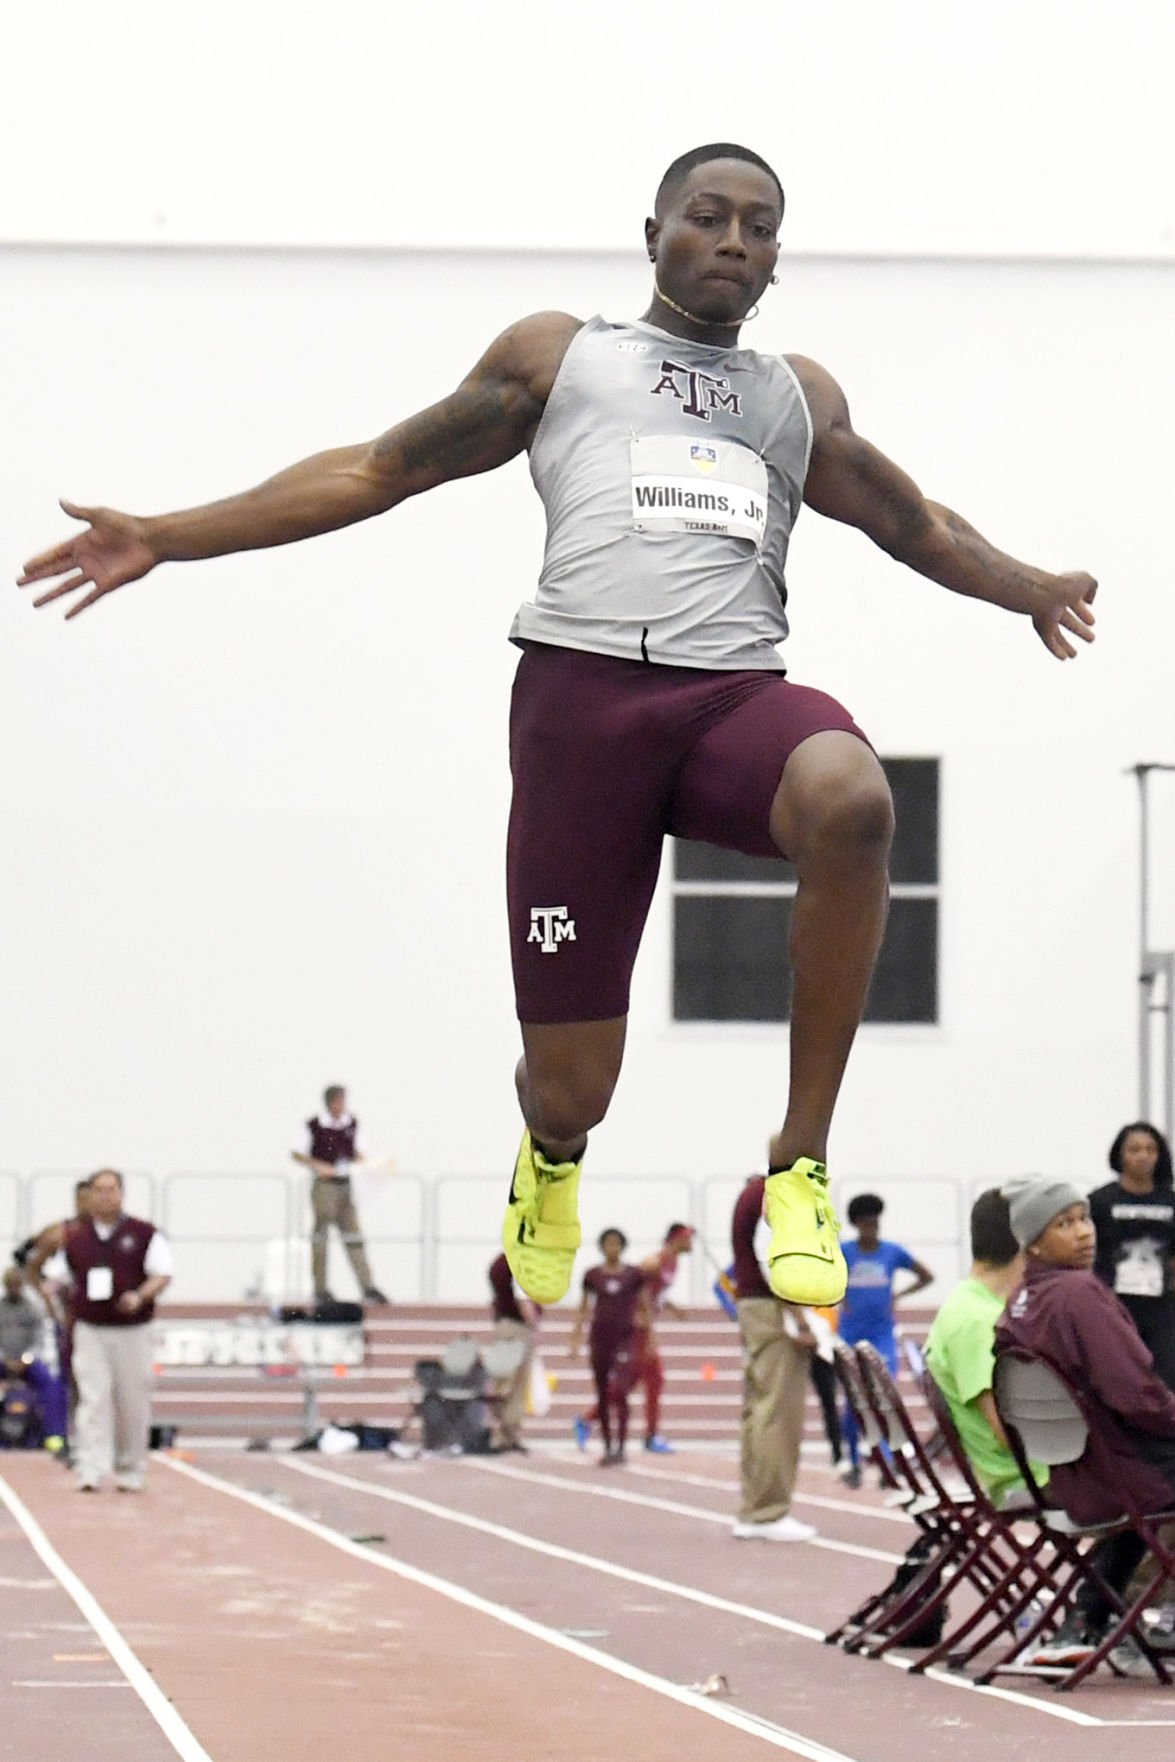 Aggie men fare well on first day of SEC indoor track meet Track and